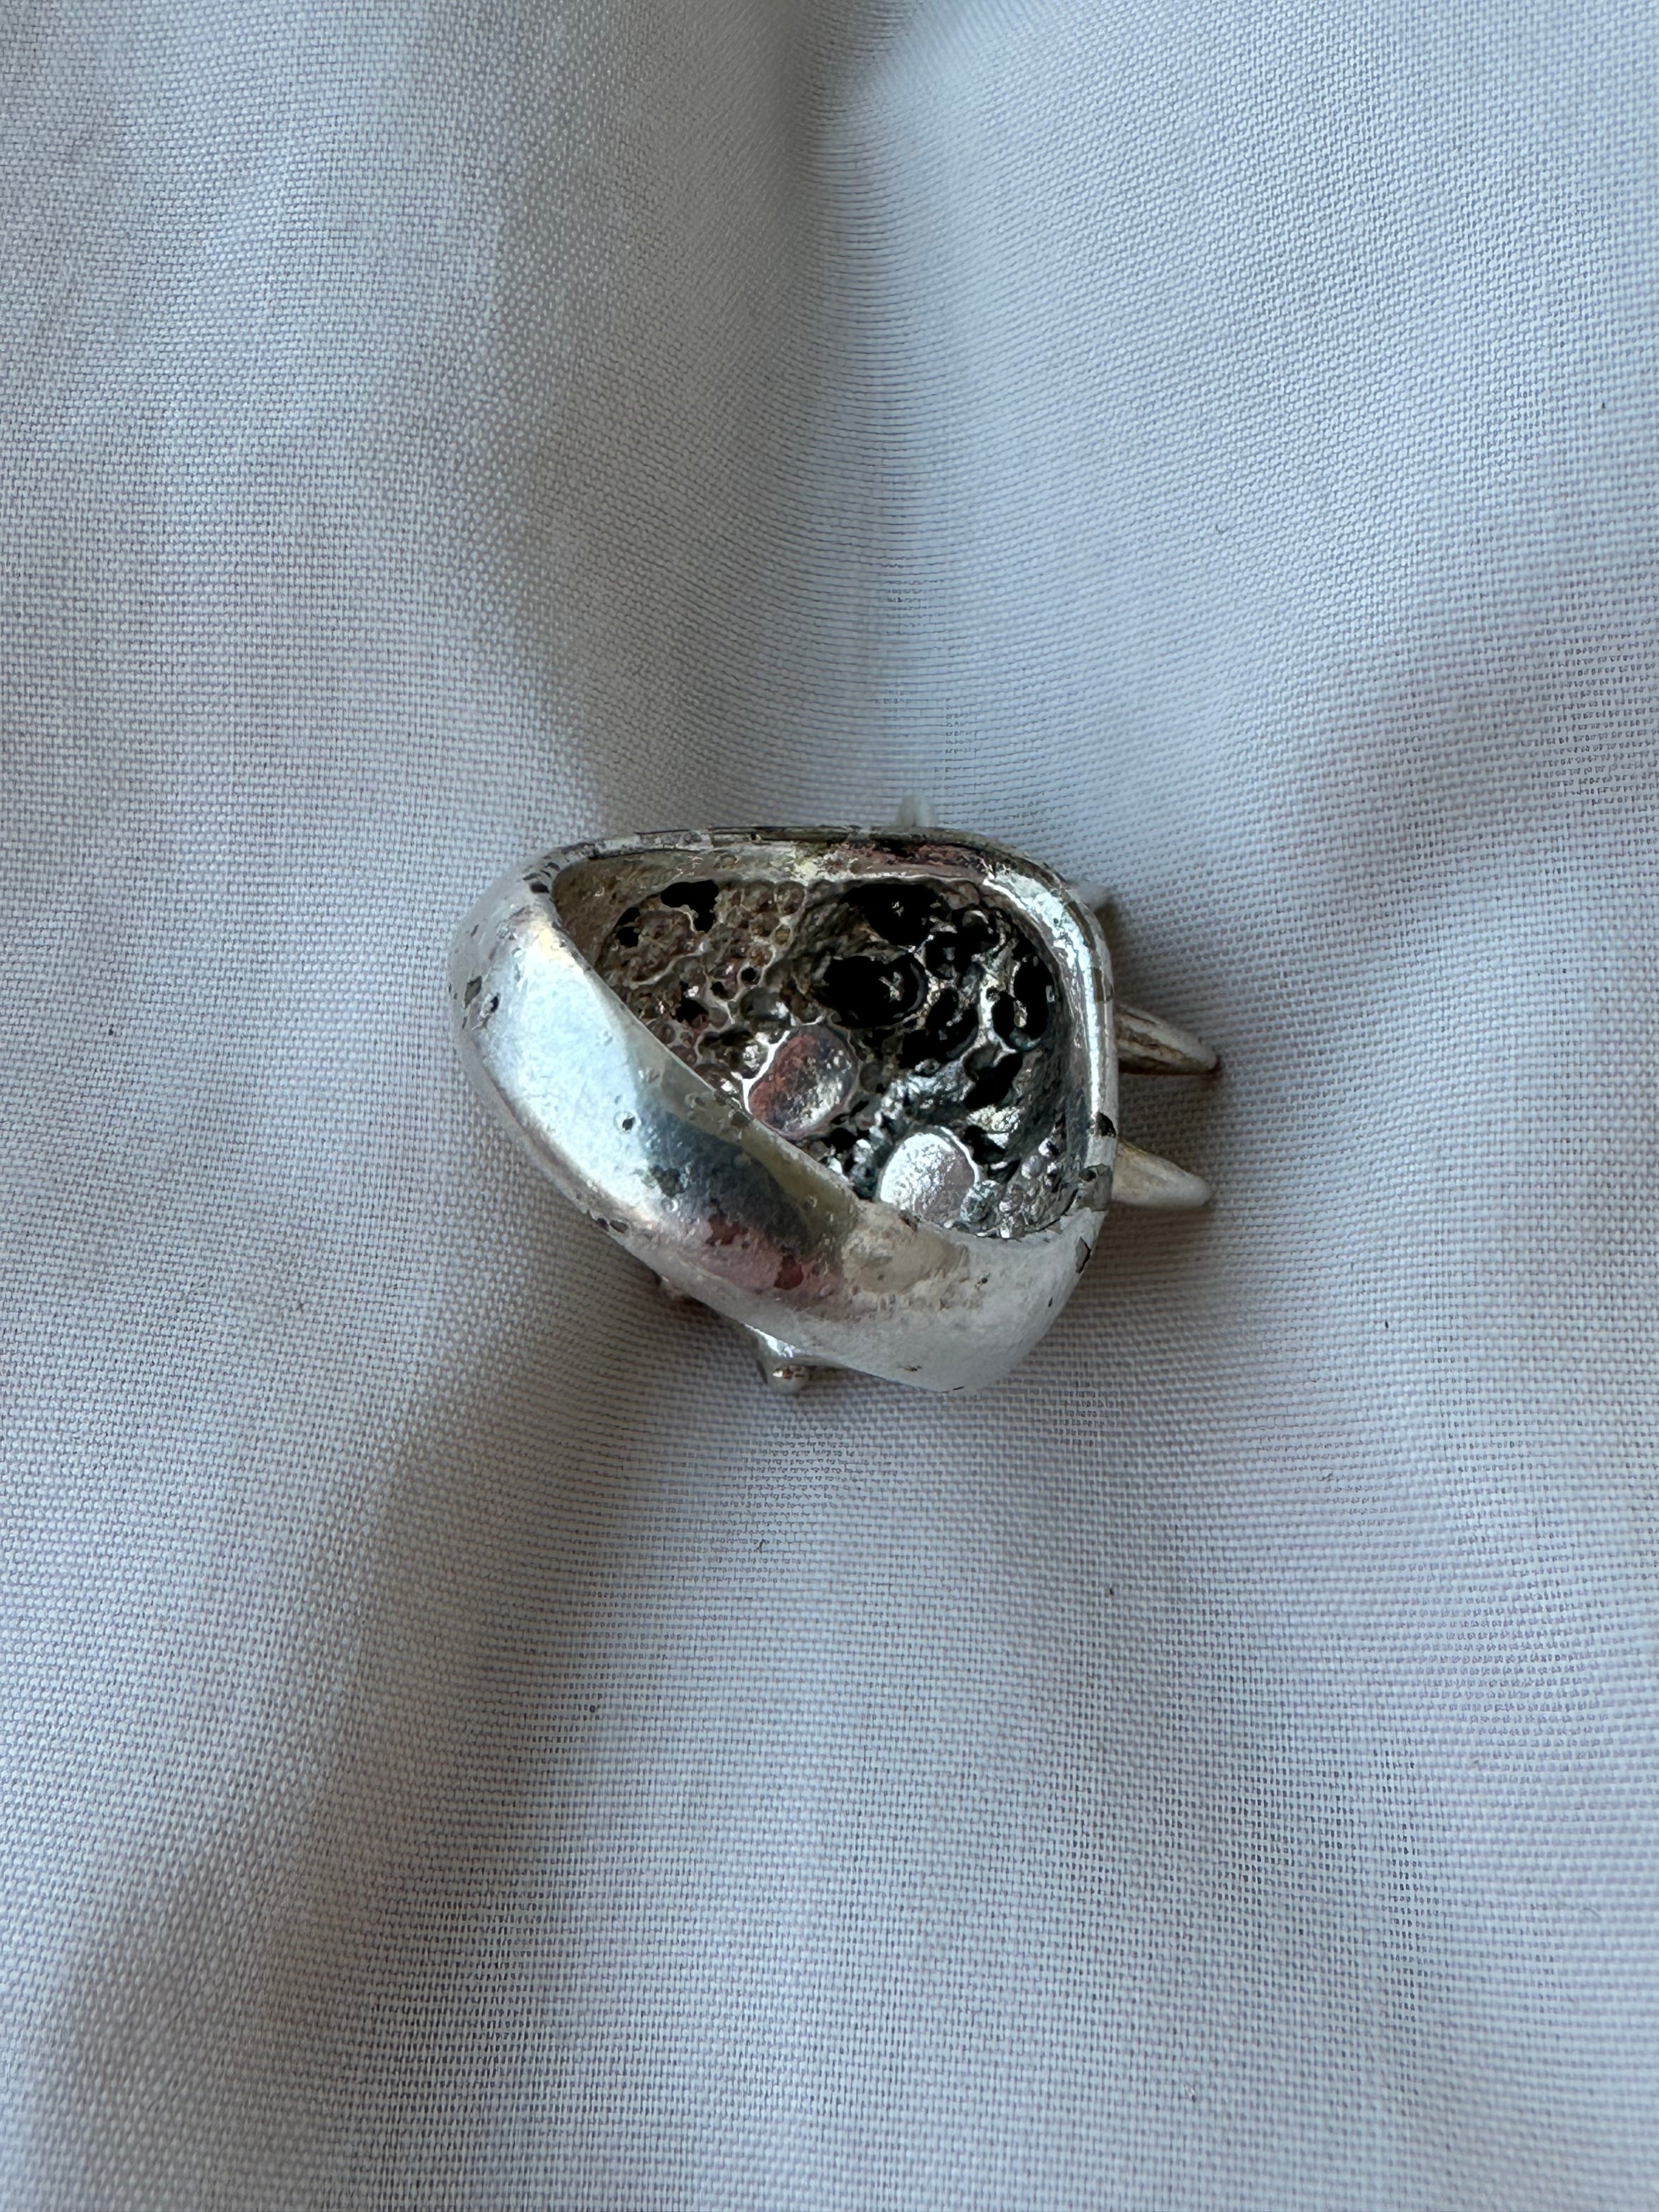 1994 G&S Spiked Skull Ring Size 7